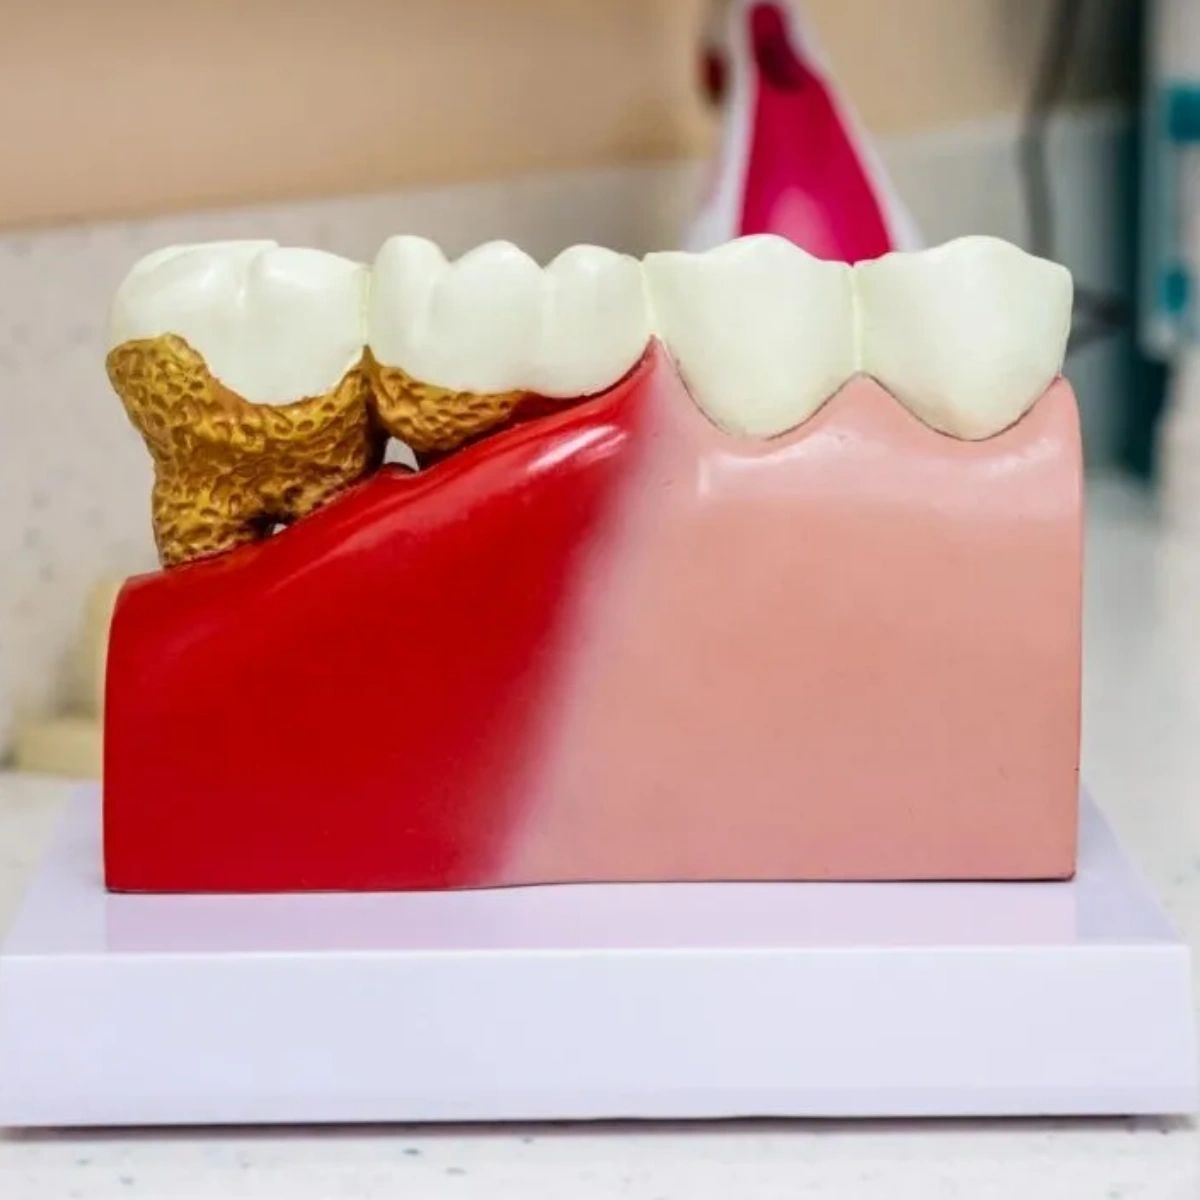 Root canal treatment is designed to eliminate bacteria from the infected root canal, prevent reinfection of the tooth, and save the natural tooth. If you experience severe pain while chewing or biting or lingering sensitivity to hot or cold, you may need a root canal.